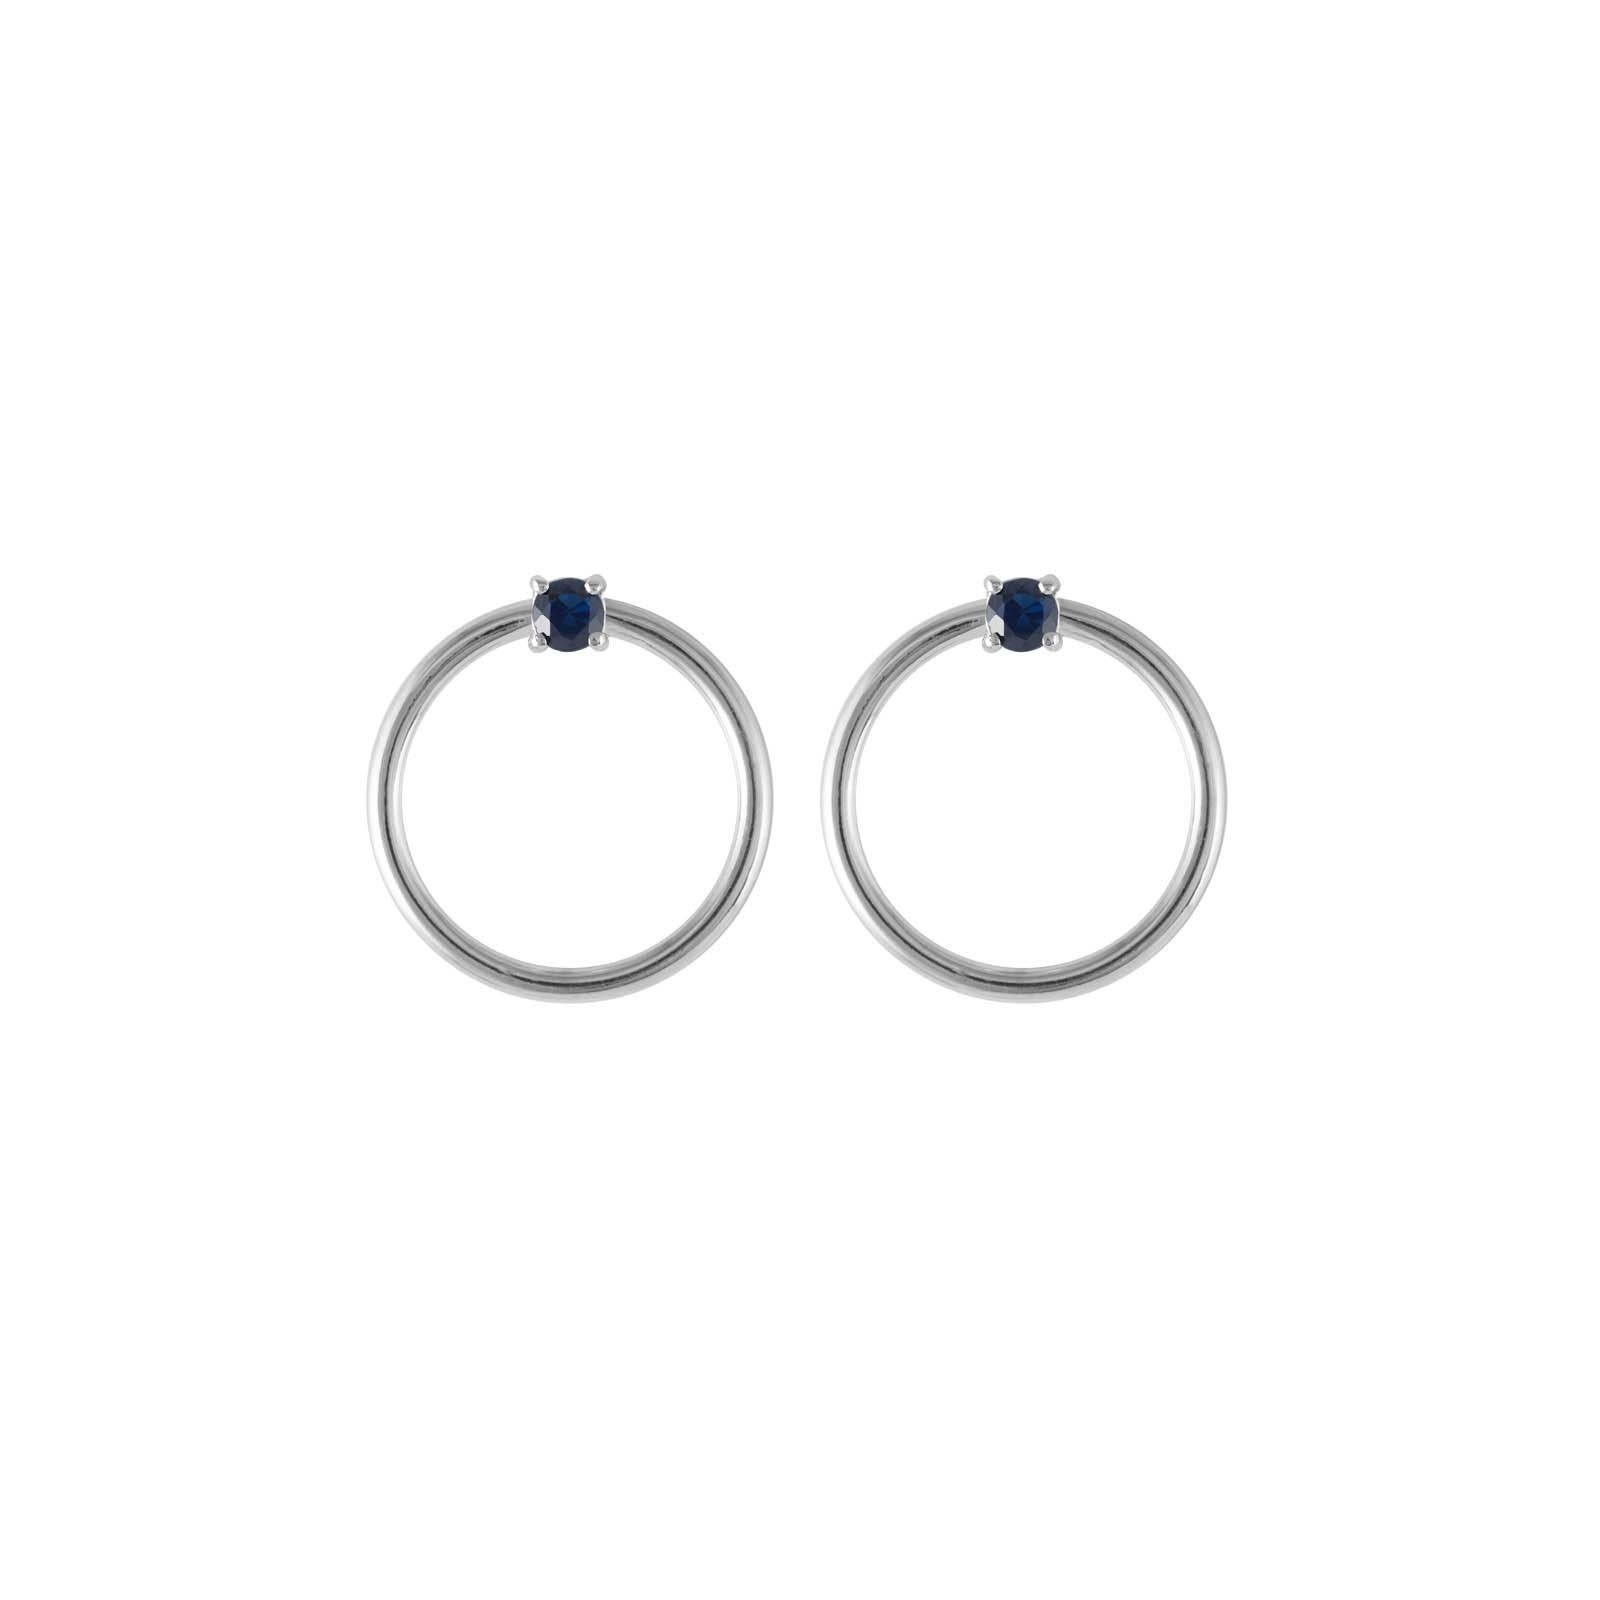 Daou 18K Sapphire and White Gold Hoop Earrings from the Orbit Collection For Sale